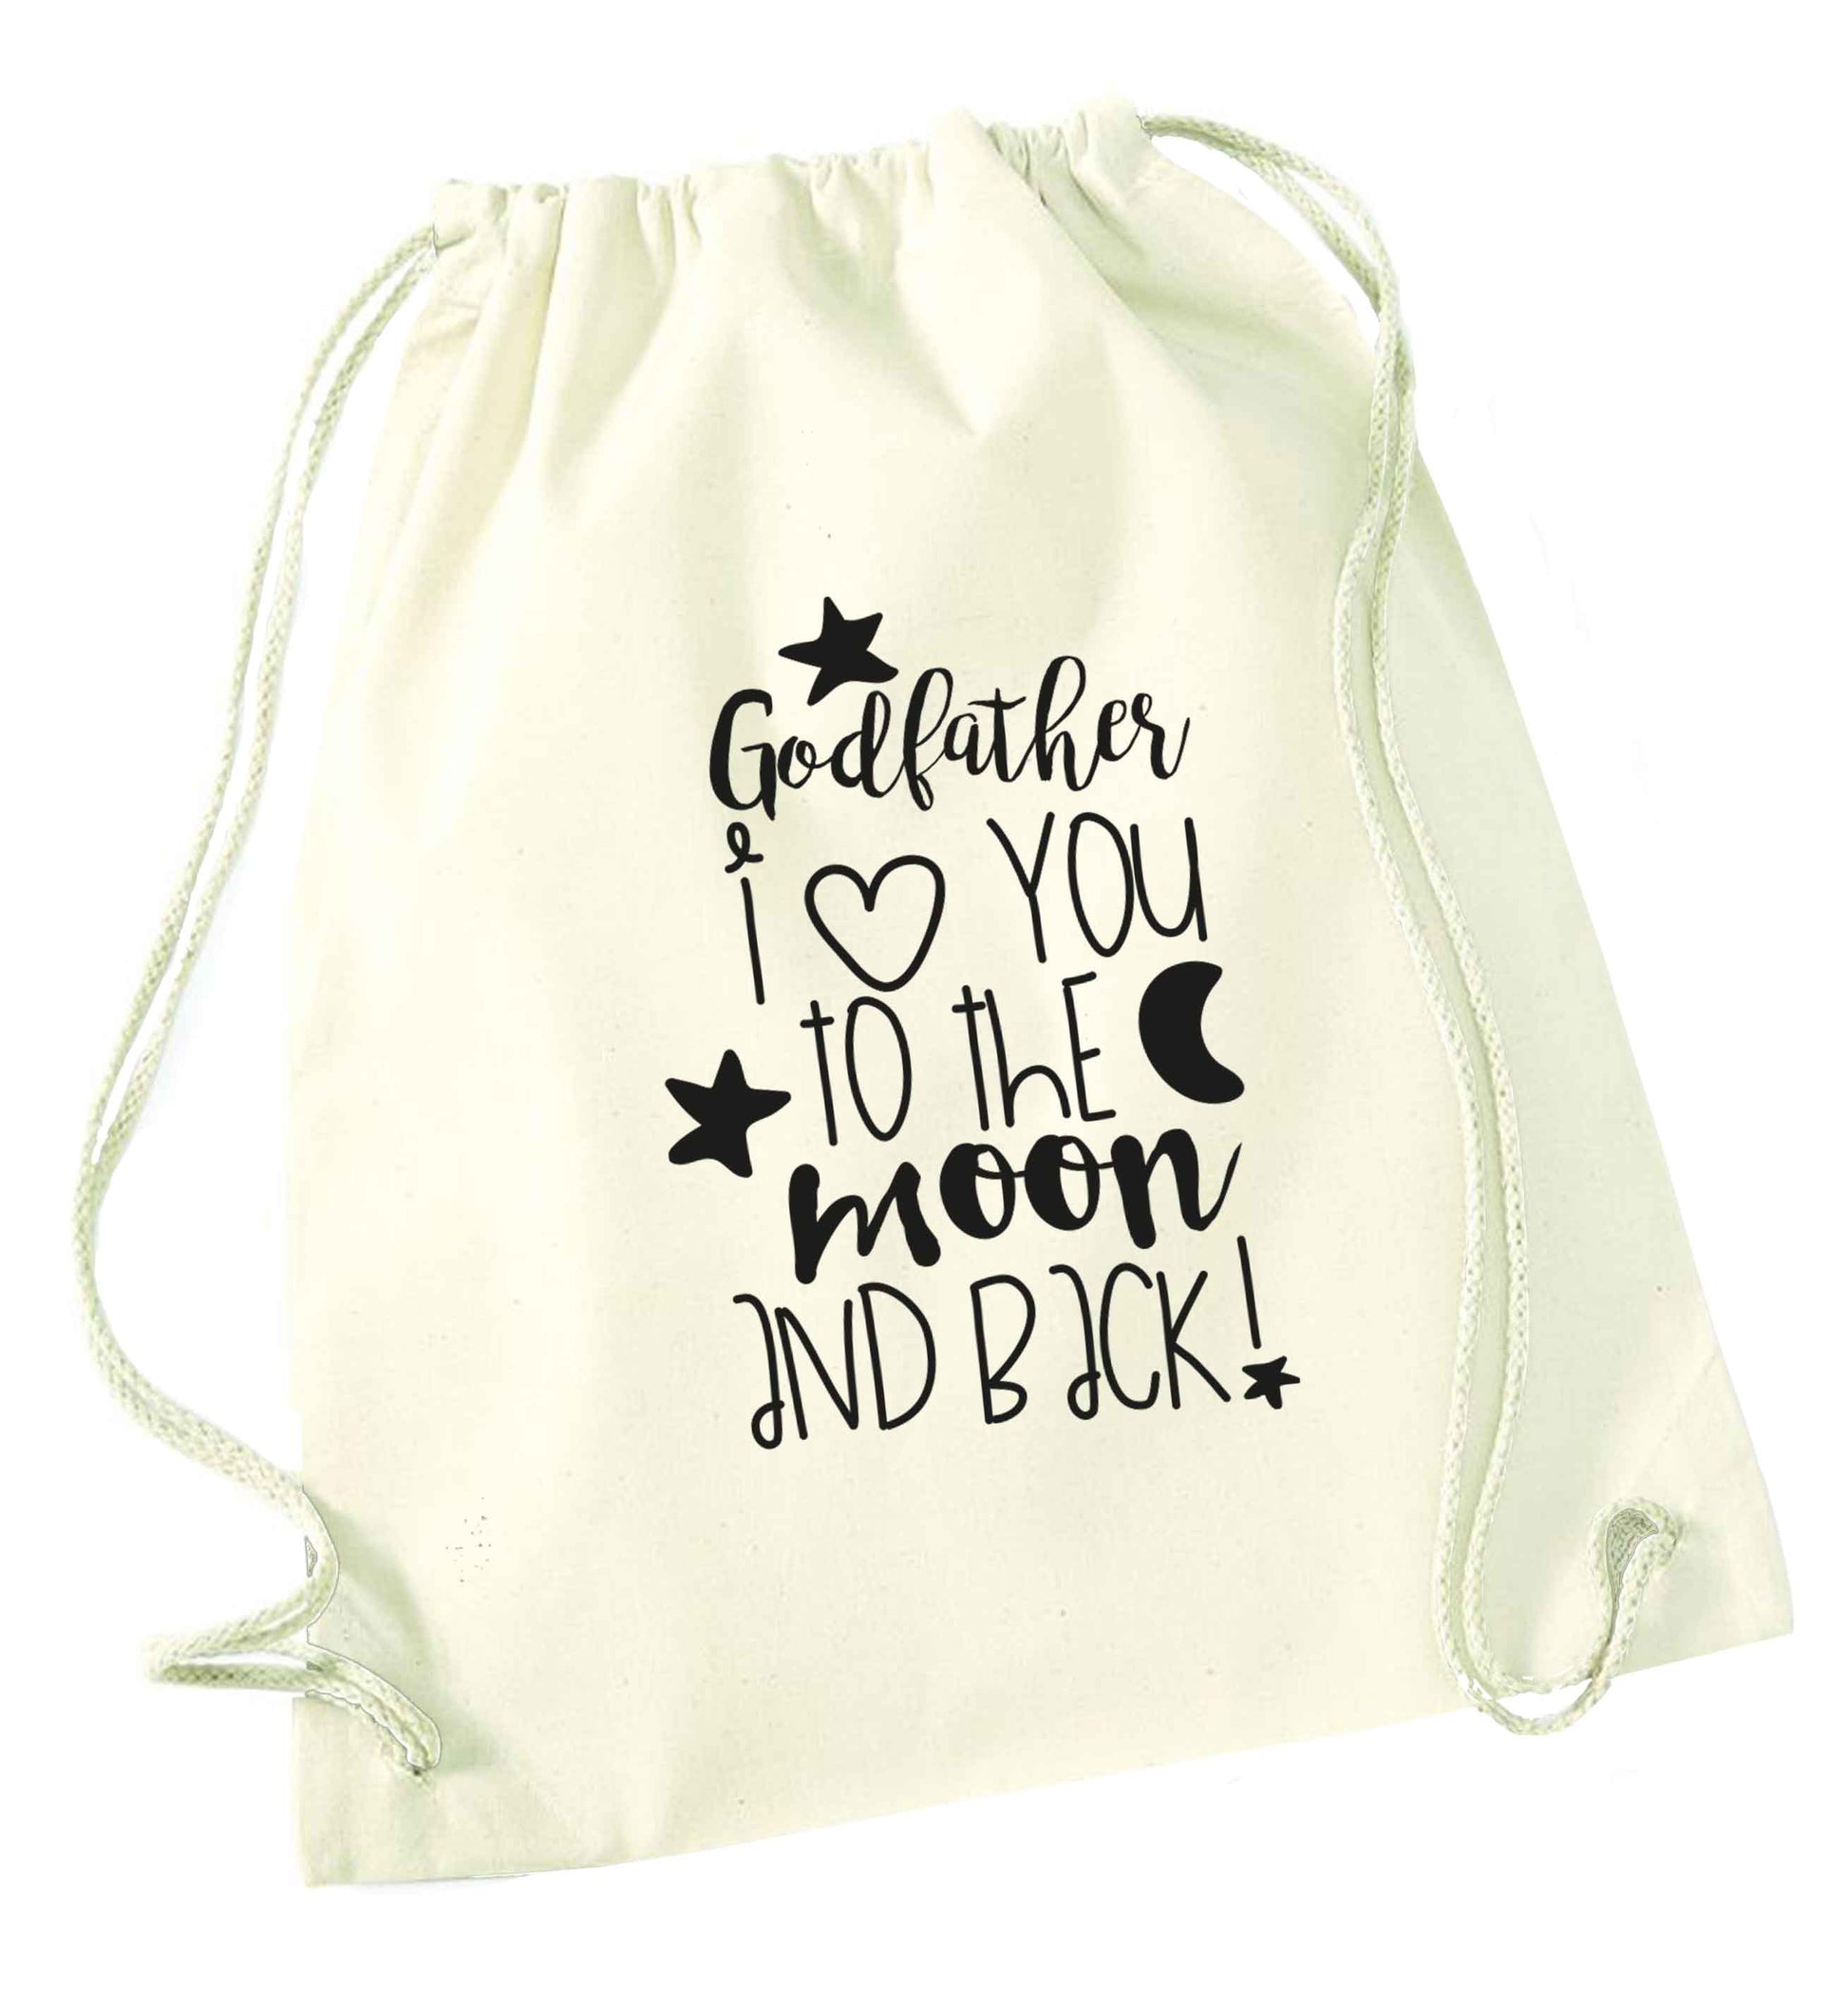 Godfather I love you to the moon and back natural drawstring bag